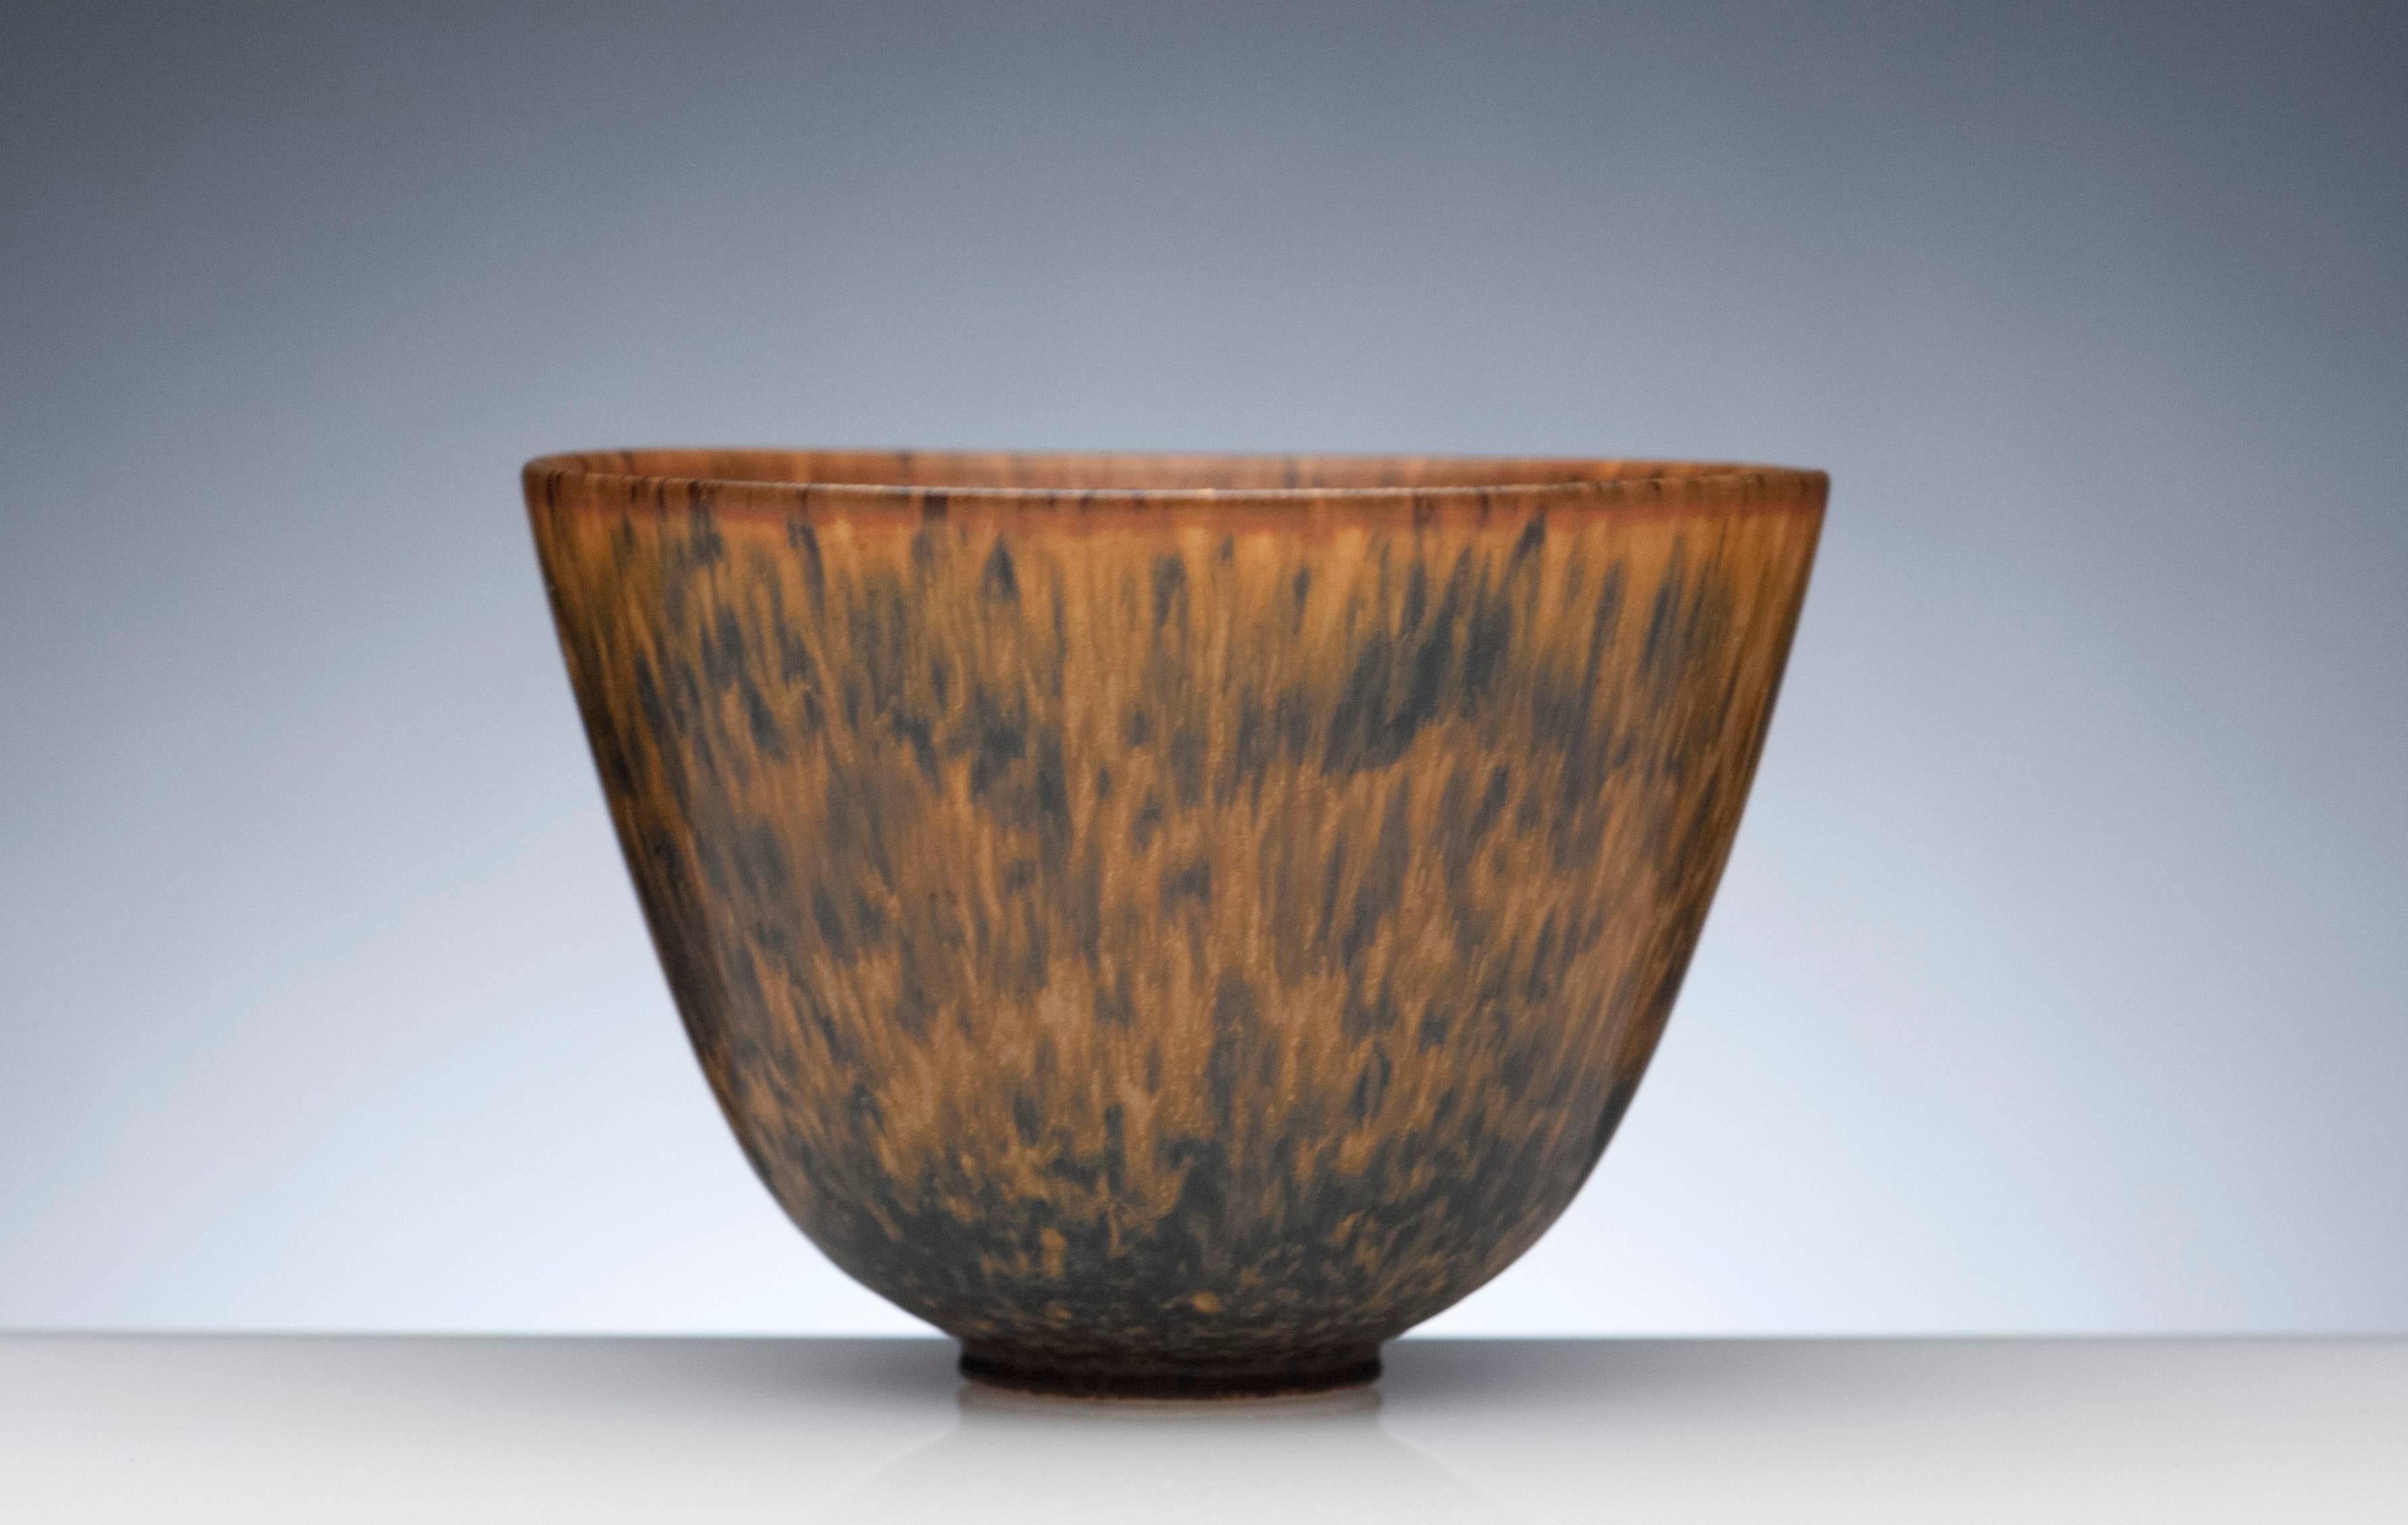 Top quality bowl by Gunnar Nylund (1904-1997) of Sweden. This is a beautiful example of Nylund's haresfur glaze. Signed to underside.